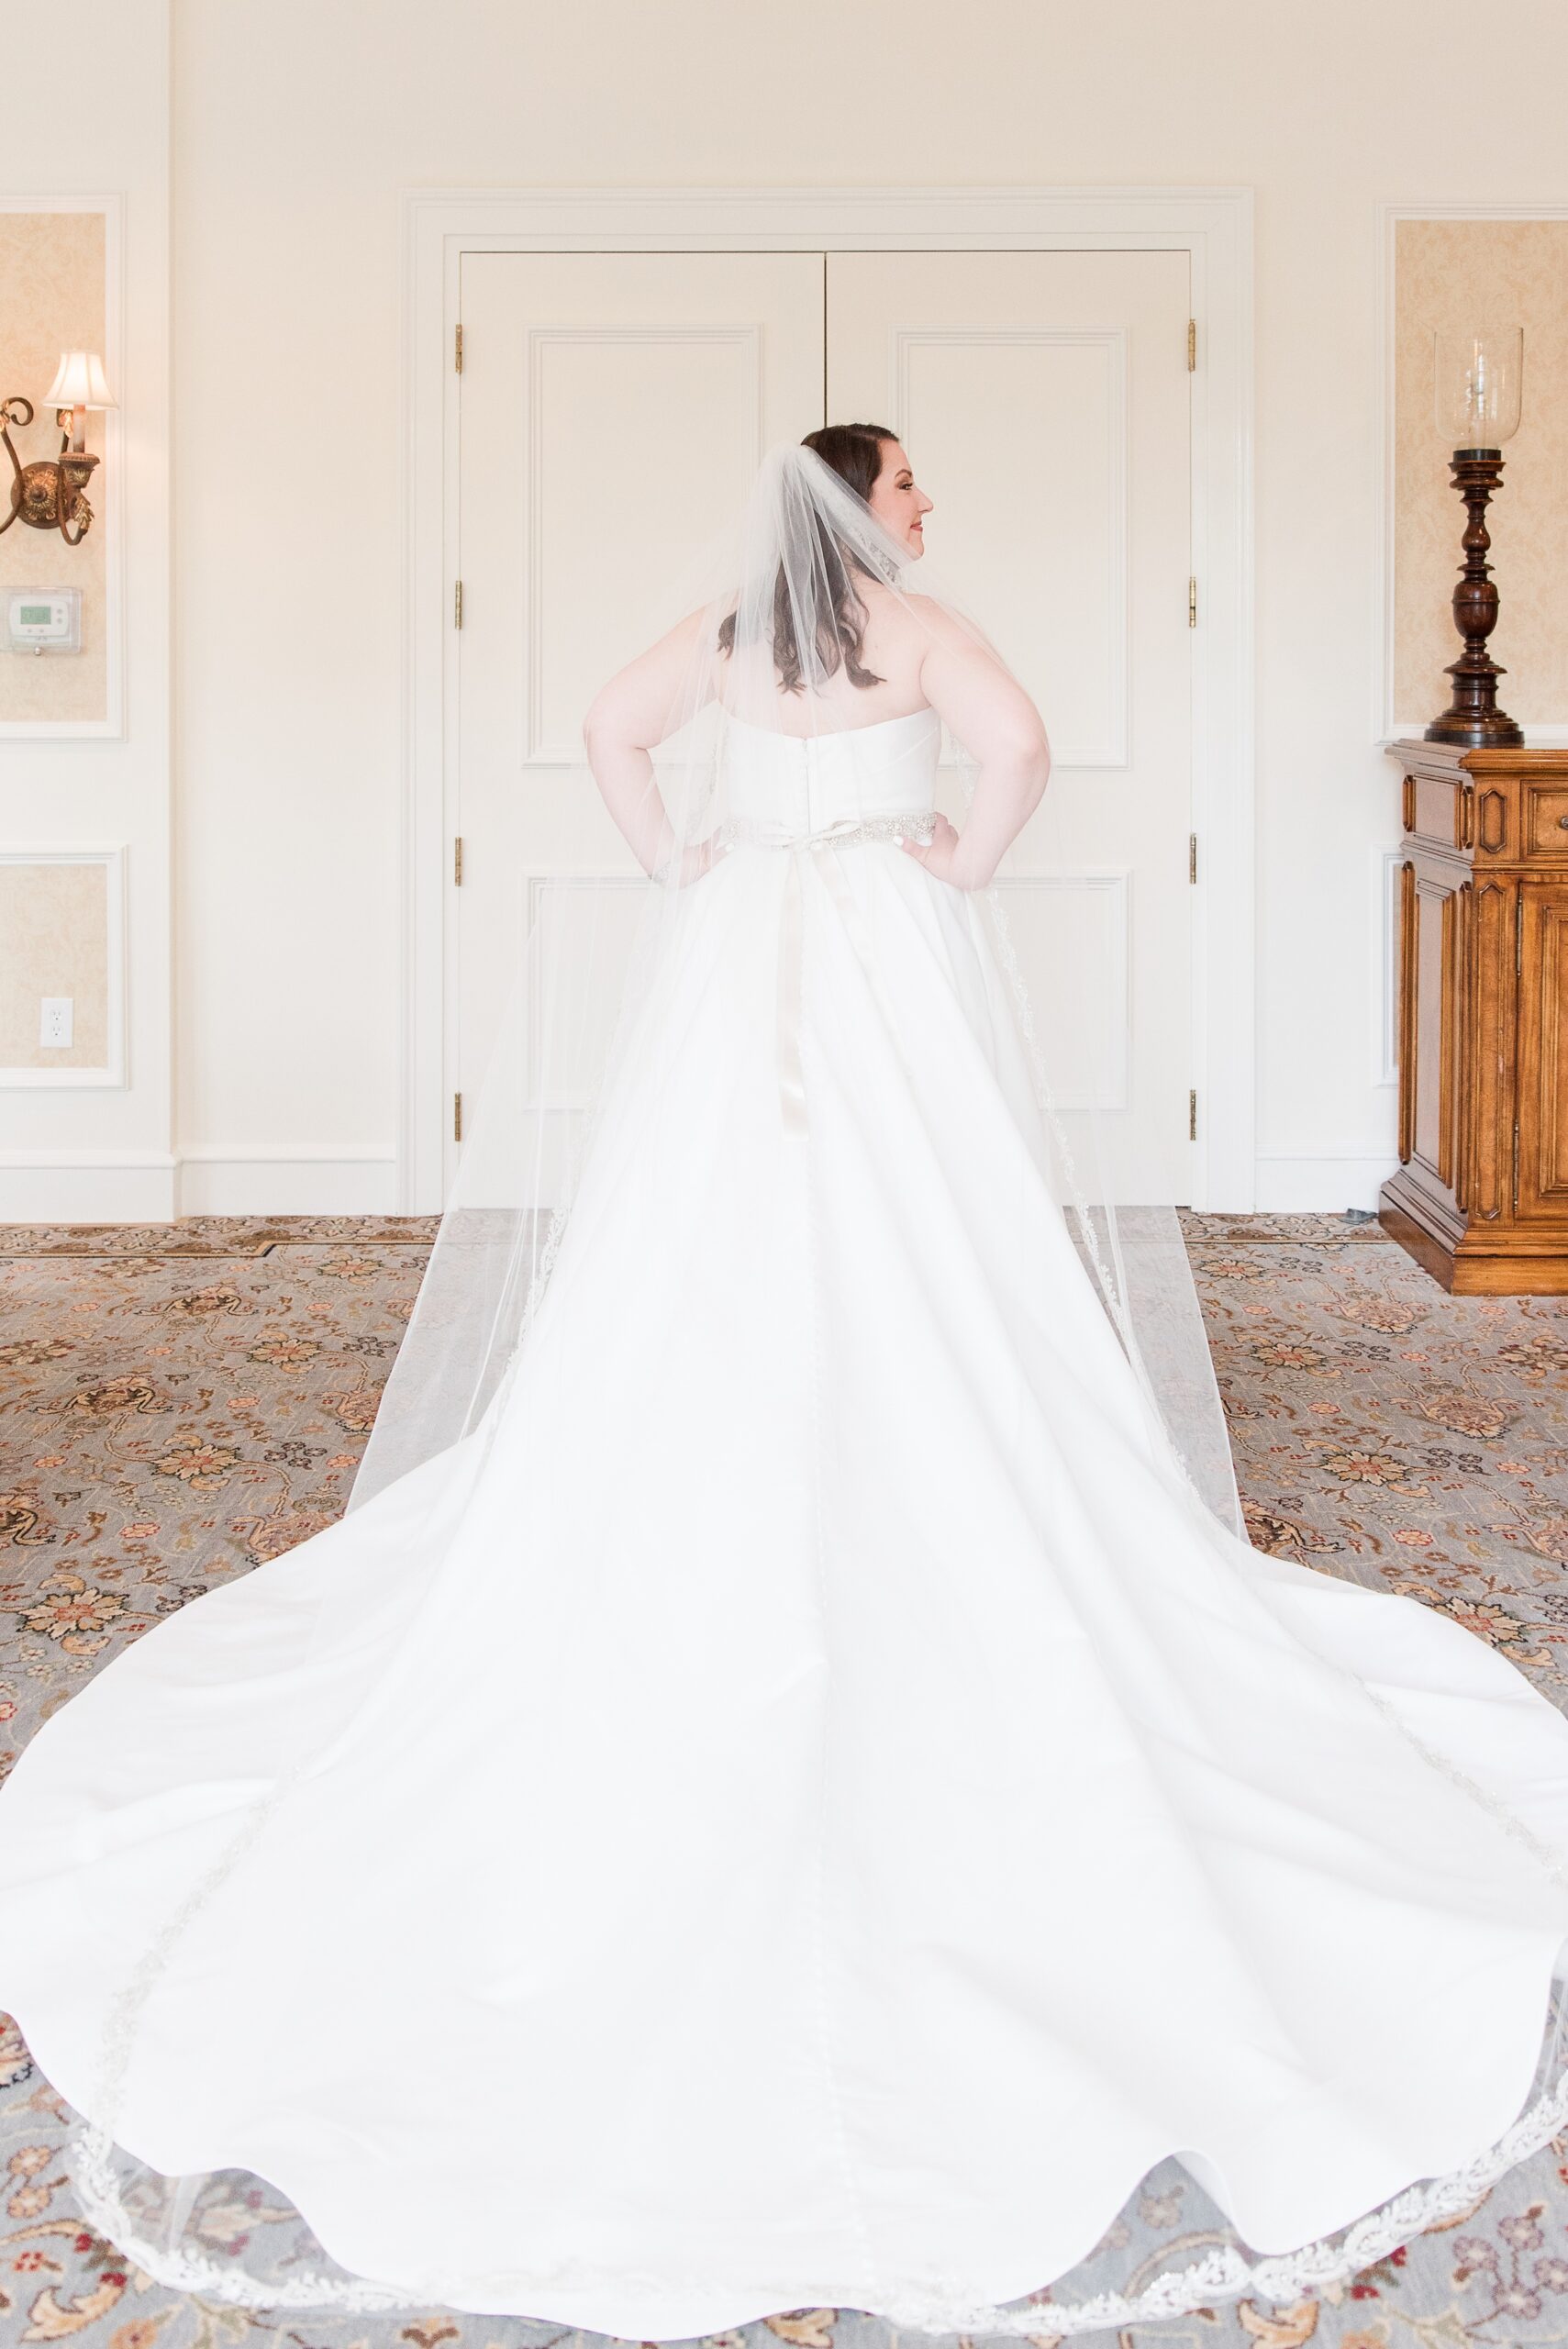 A bride proudly shows off her long train and veil in the getting ready room